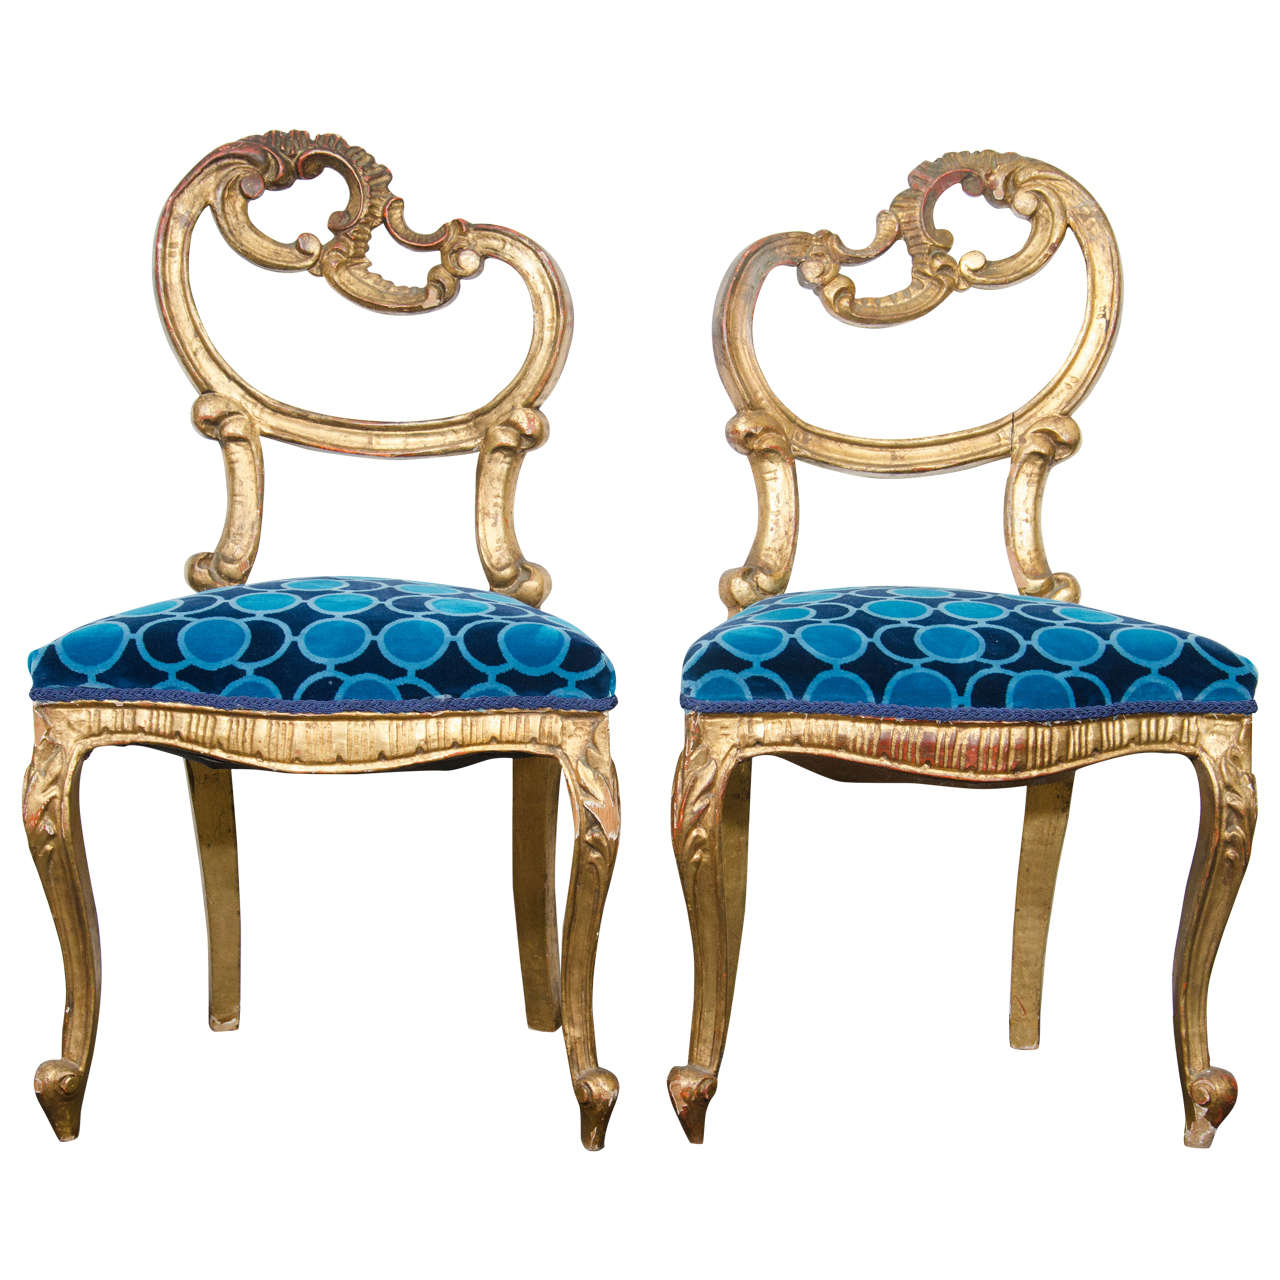 Pair of French Giltwood Louis XV Style Side Chairs with Asymmetrical Backs